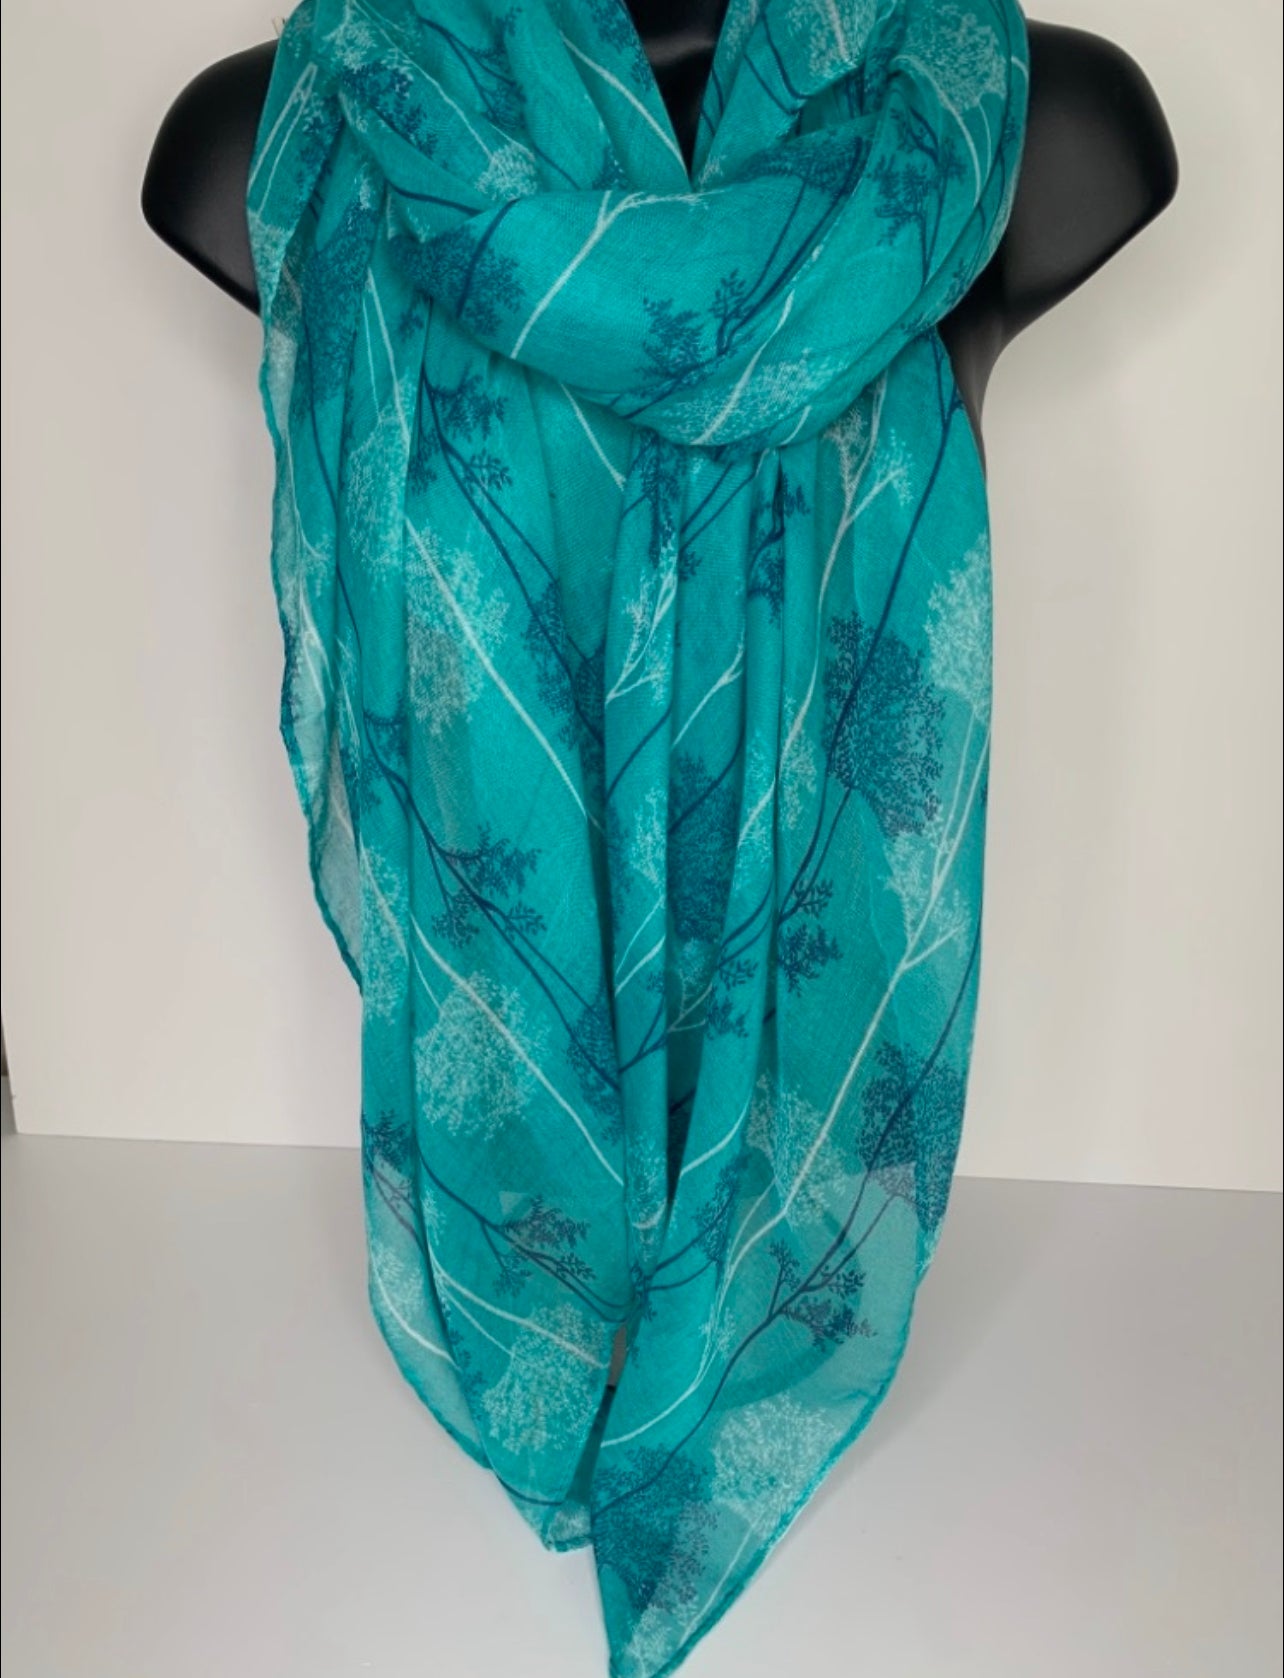 Aqua, white and navy ‘forest’ print scarf